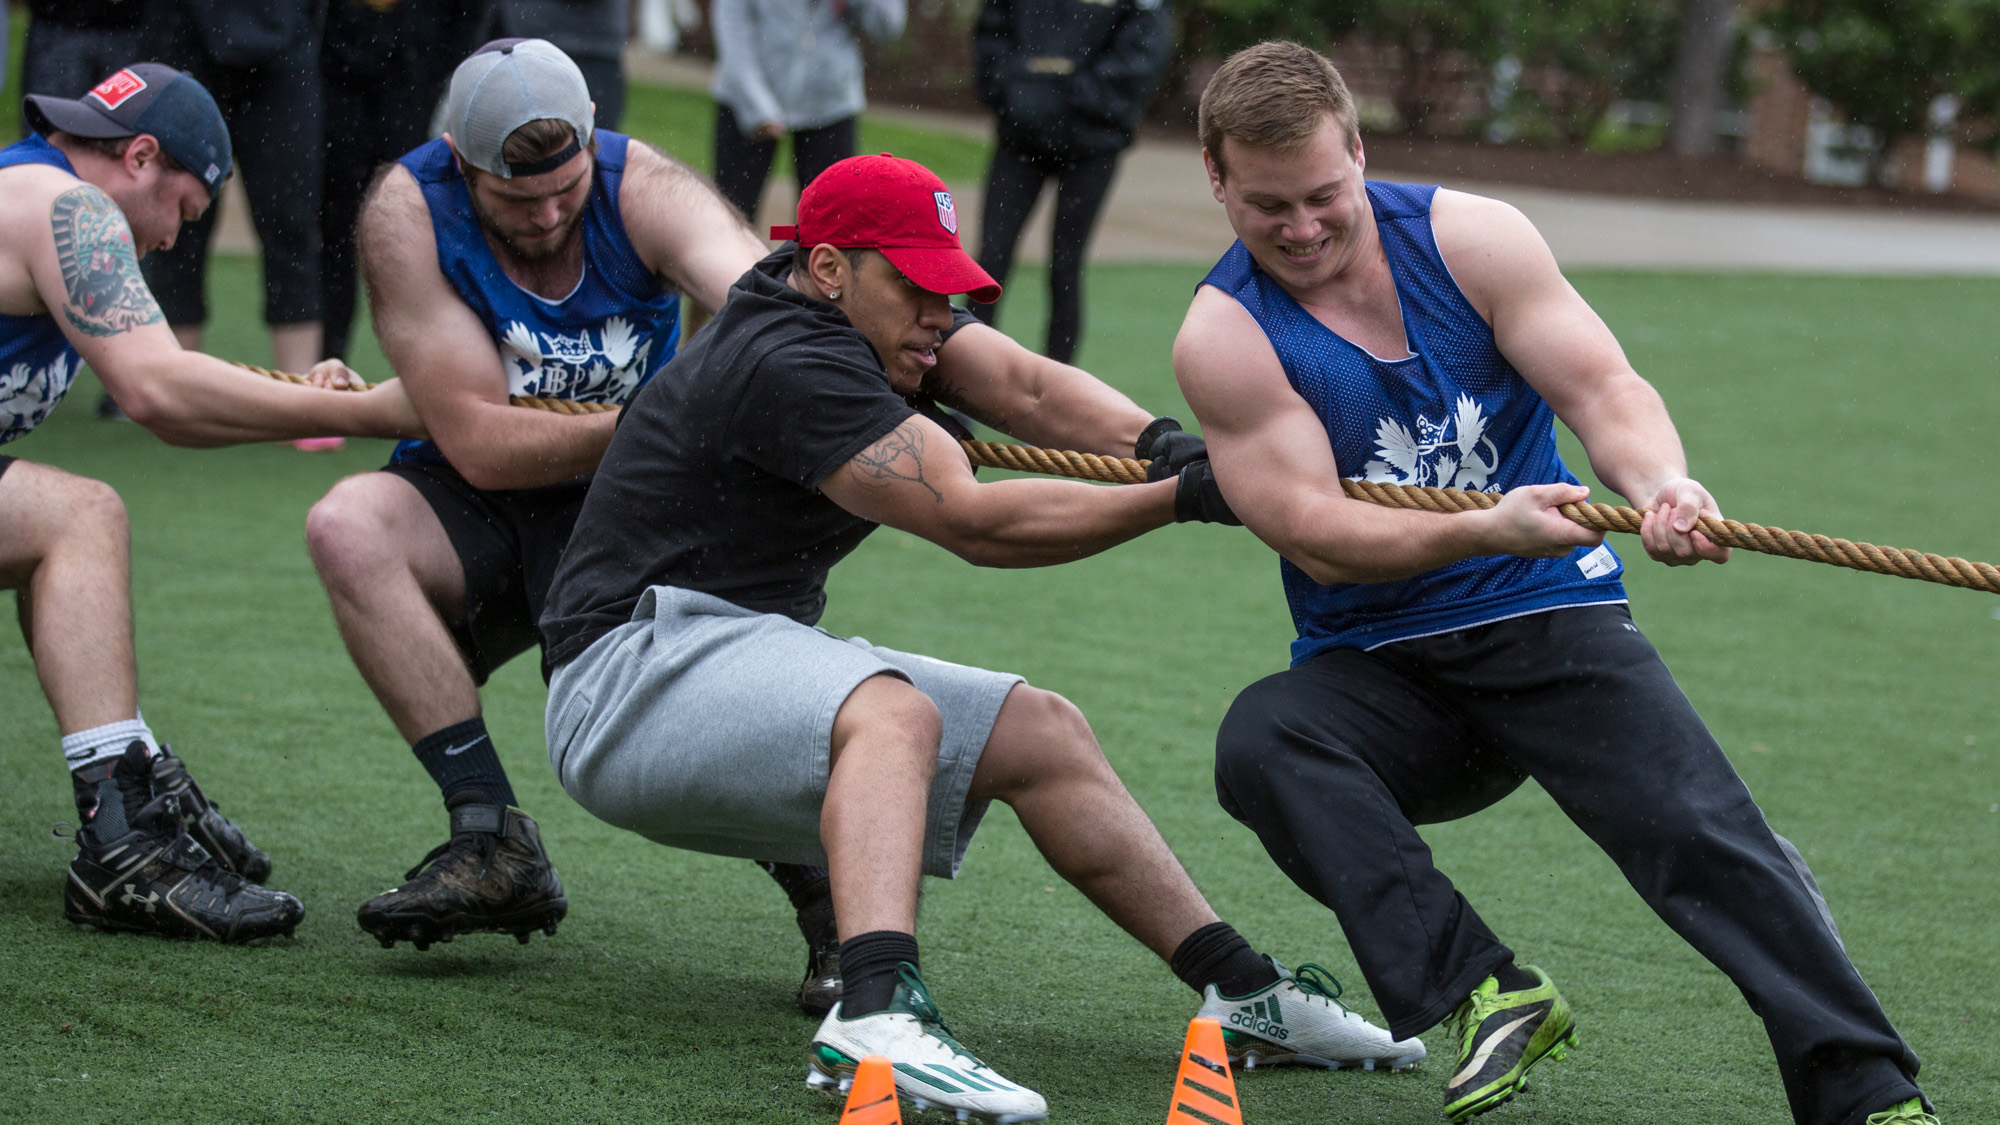 Greek students participate in tug-of-war.